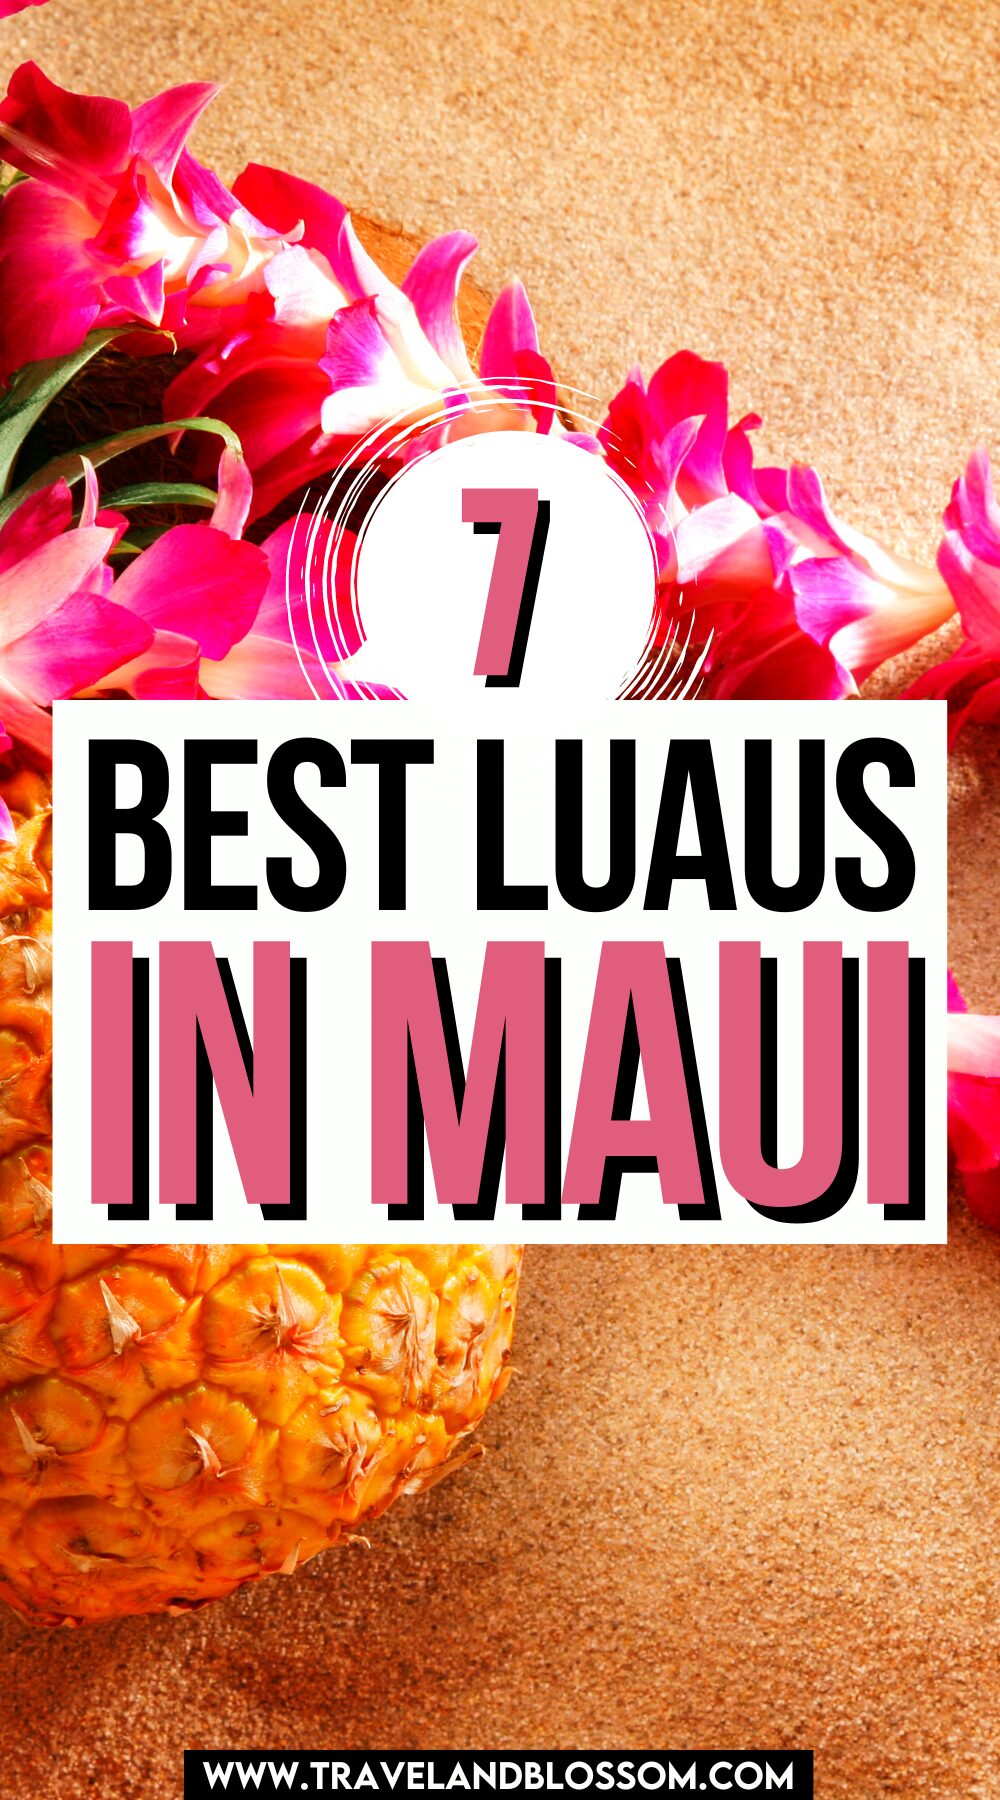 Experience The 7 Best Luaus in Maui